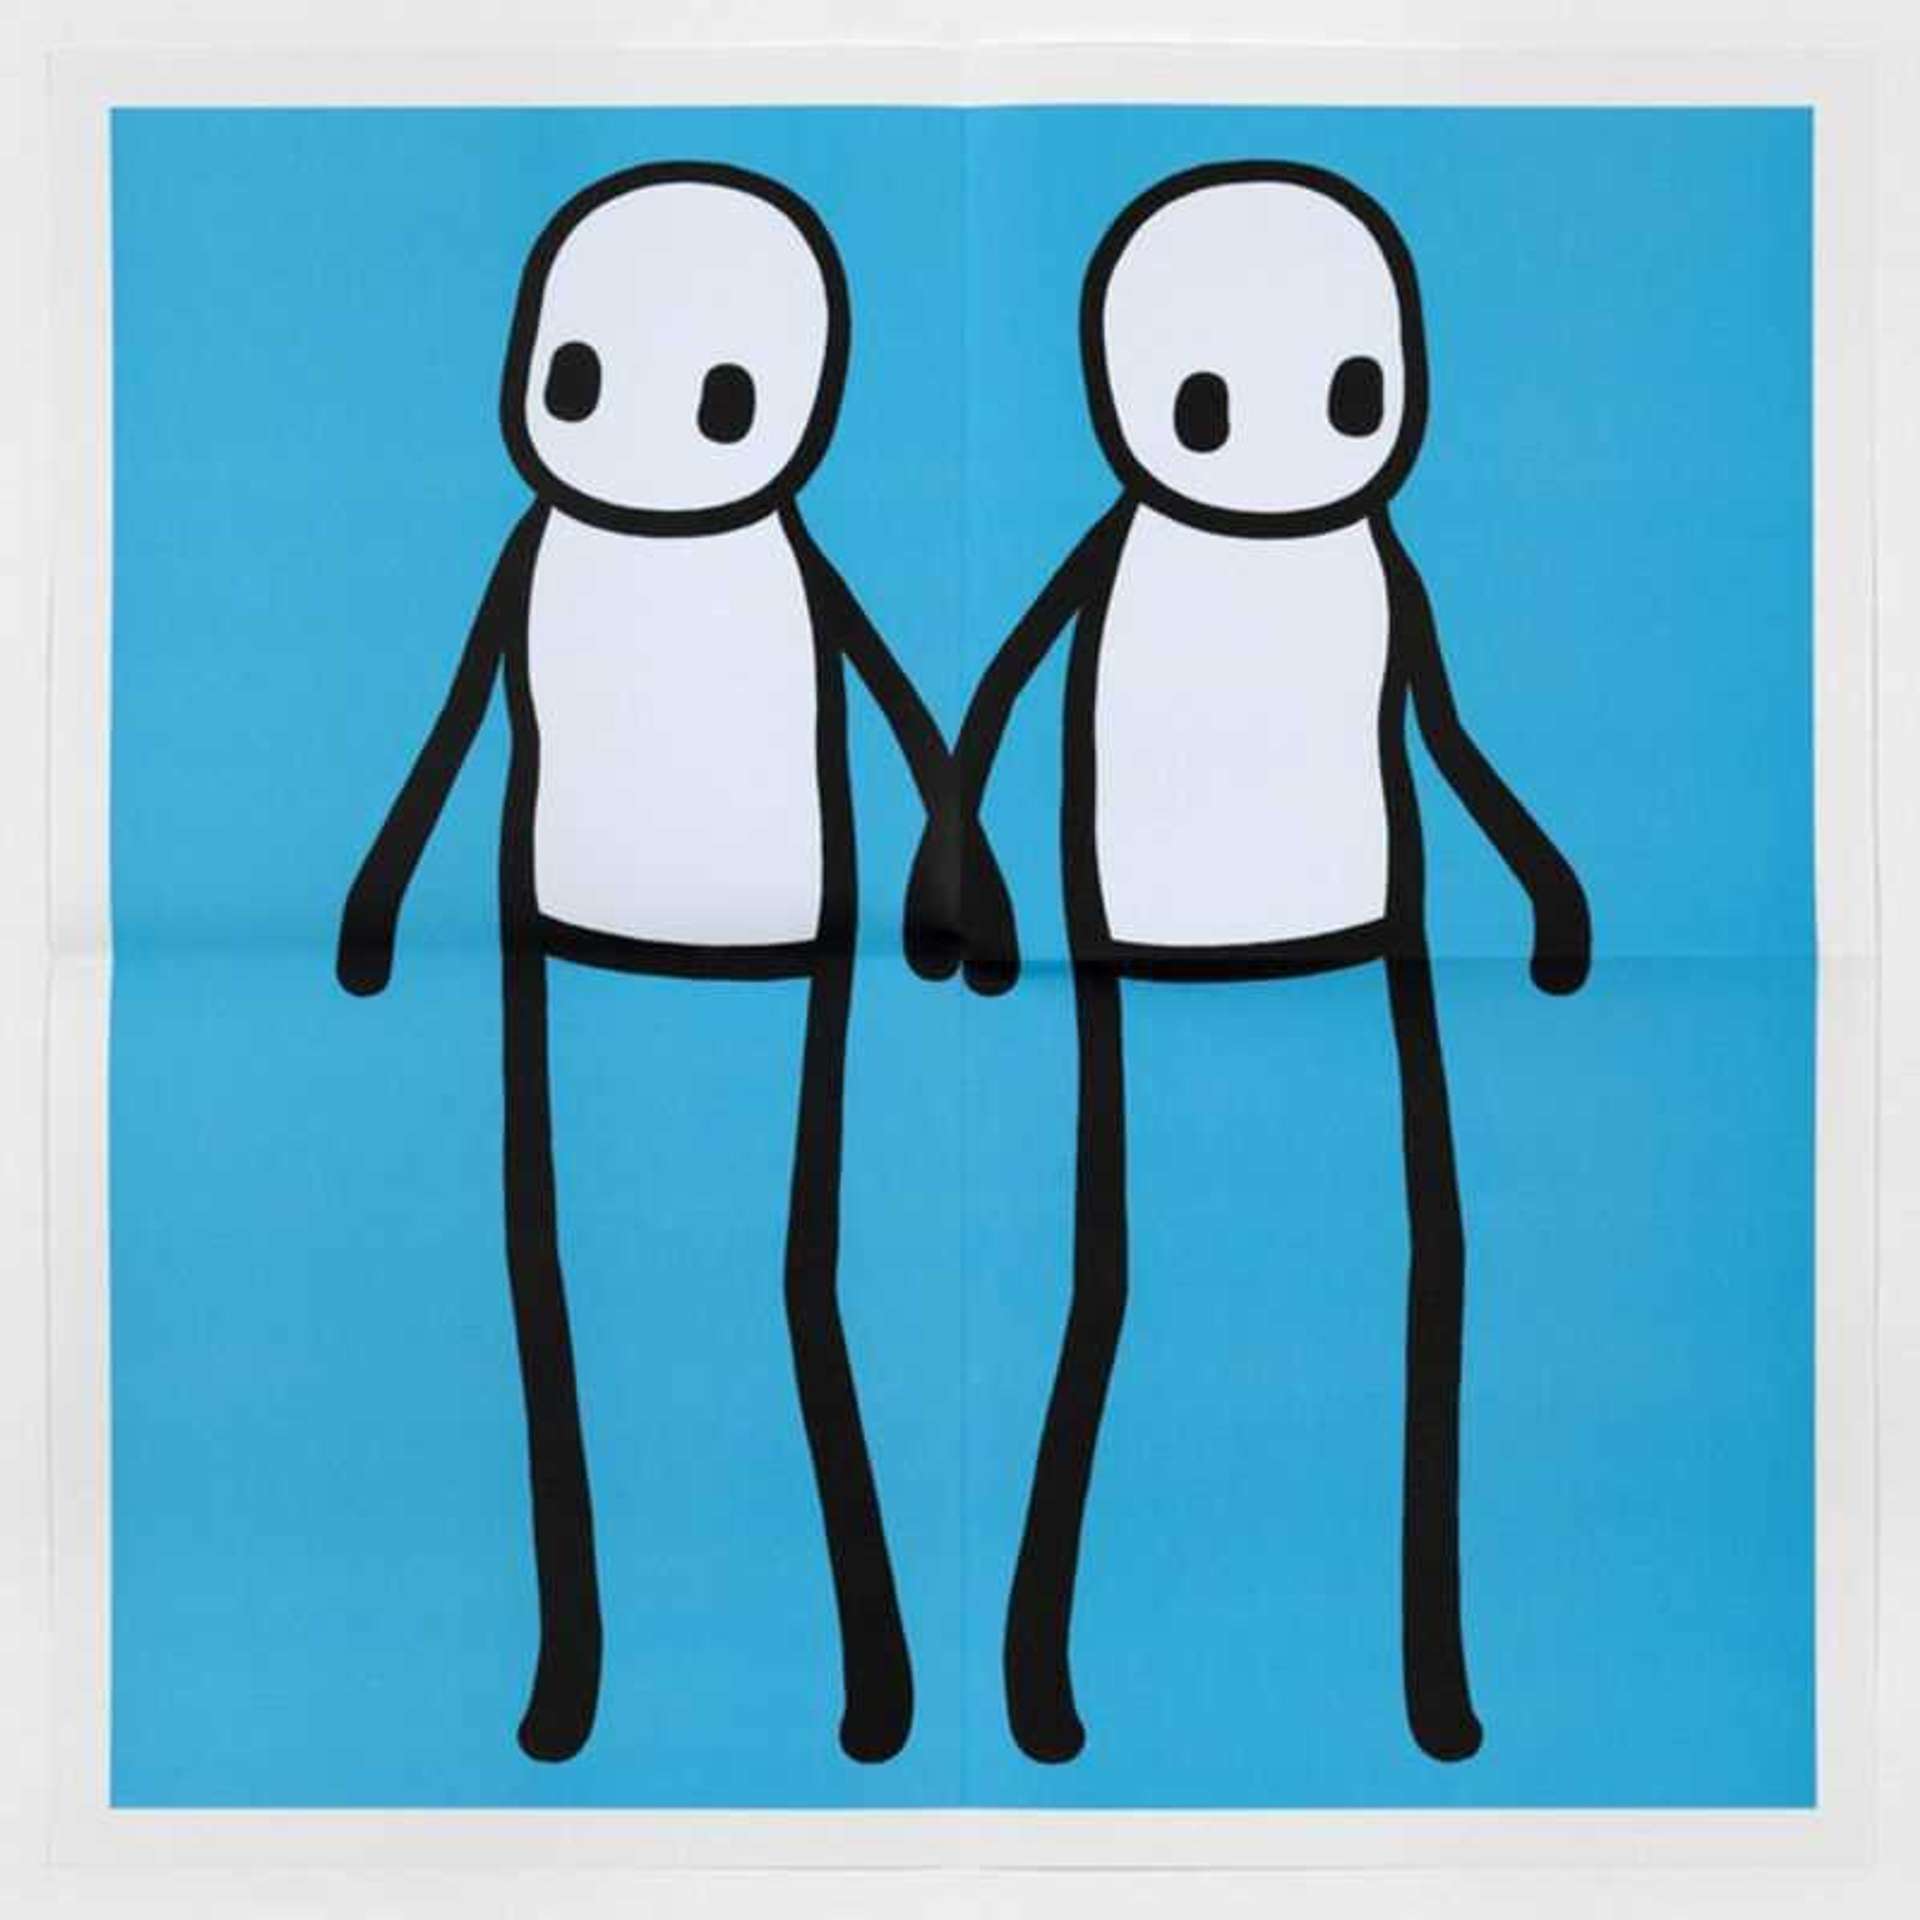 Holding Hands (blue) by Stik